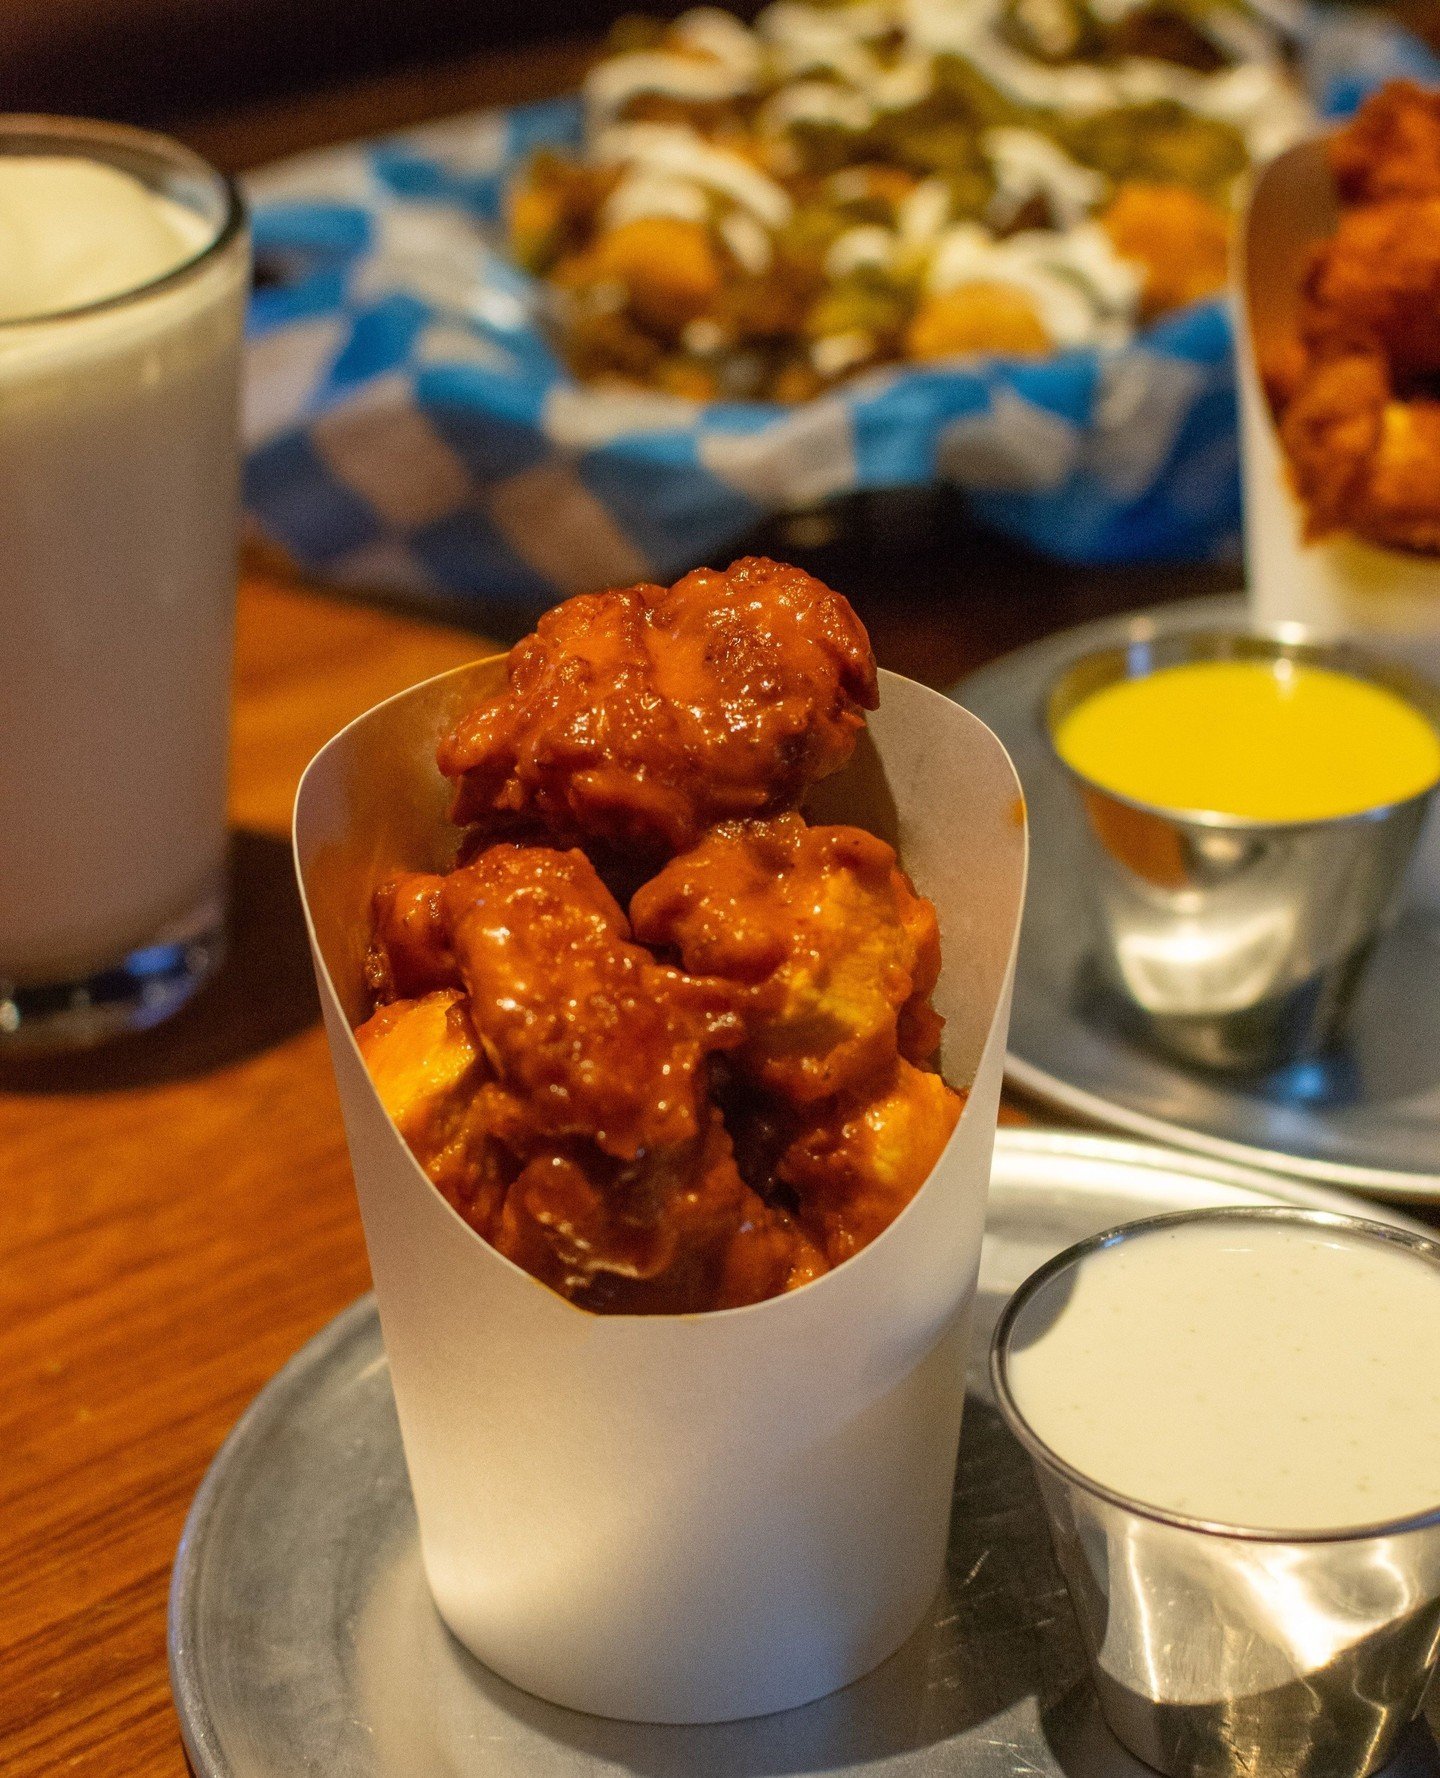 It&rsquo;s Monday at the Moonlighter and you know what that means! Happy Hour goes from open to close! We'll be serving up chicken all night. What's your favorite dipping sauce?⁠
We open at 5 and The Sox play at 5:50pm! The Cubs game is on at 6:40pm!